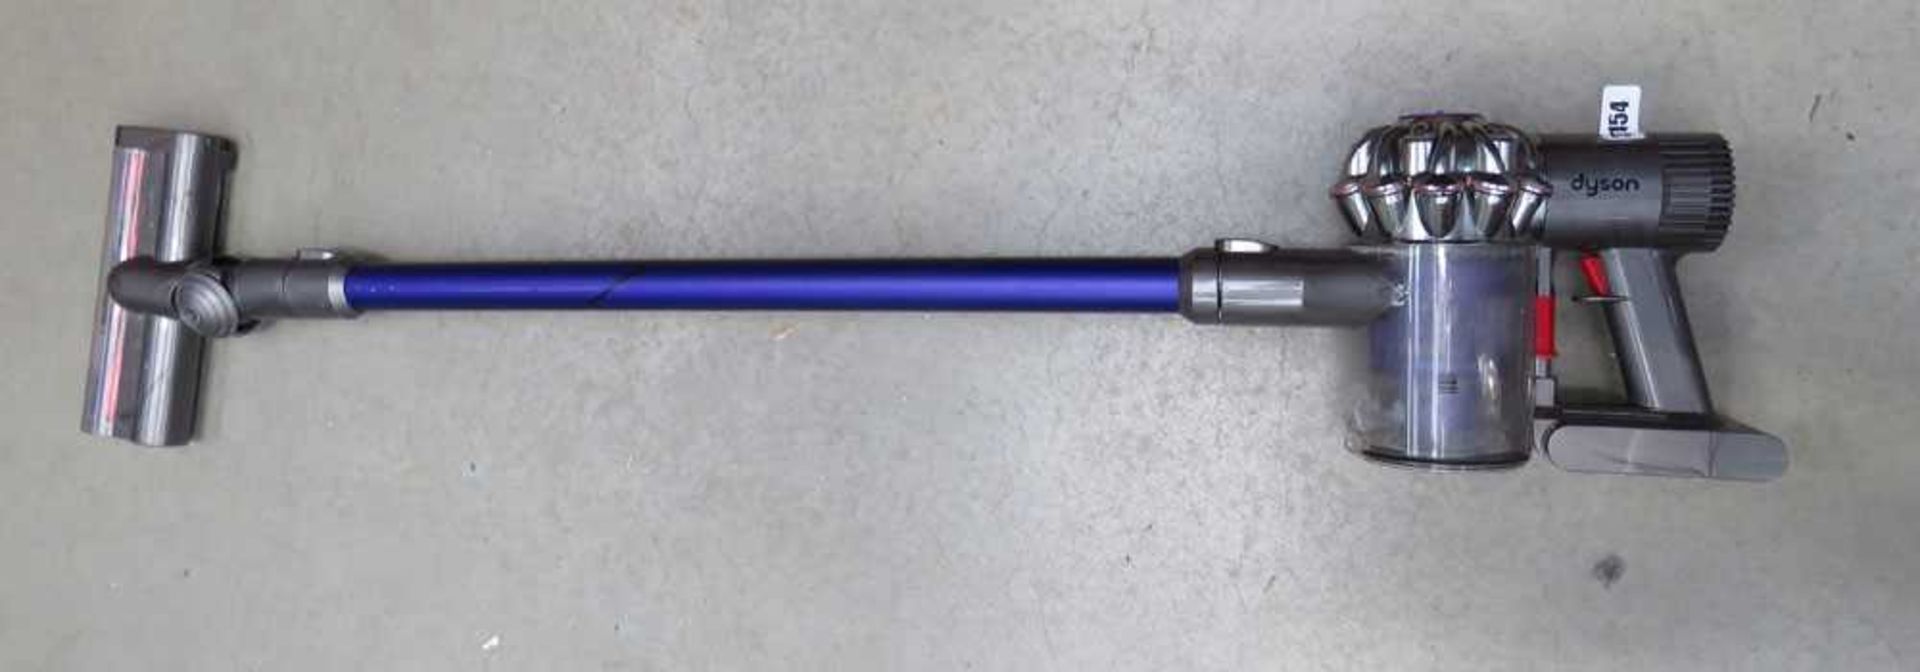 Hand held Dyson DC59 with pole, head charger and attachments